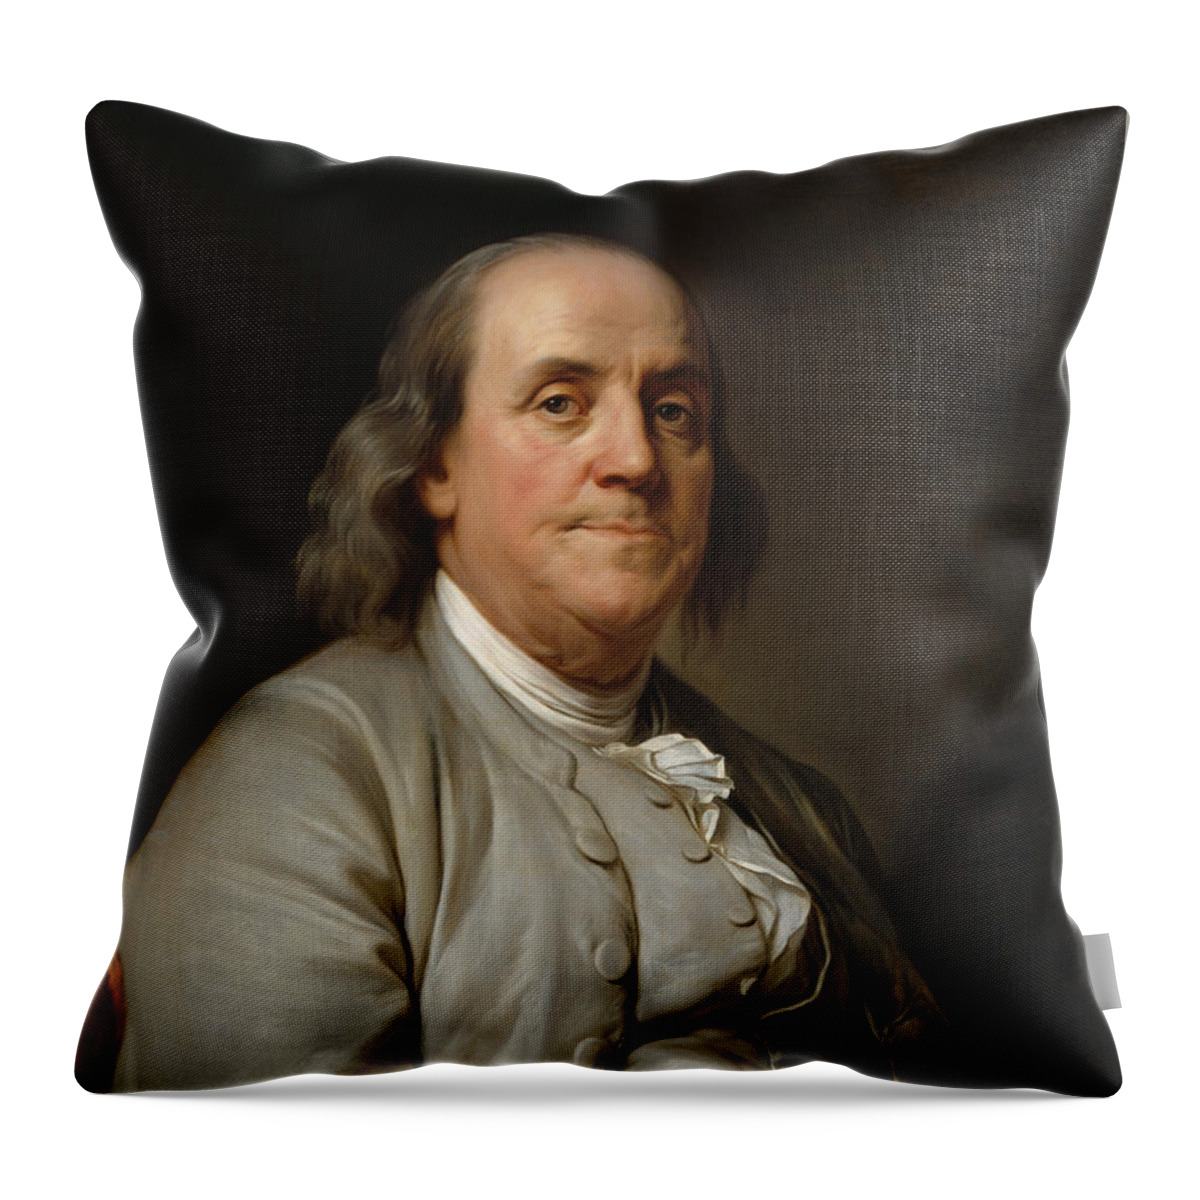 Benjamin Franklin Throw Pillow featuring the painting Benjamin Franklin Painting - Joseph Duplessis by War Is Hell Store